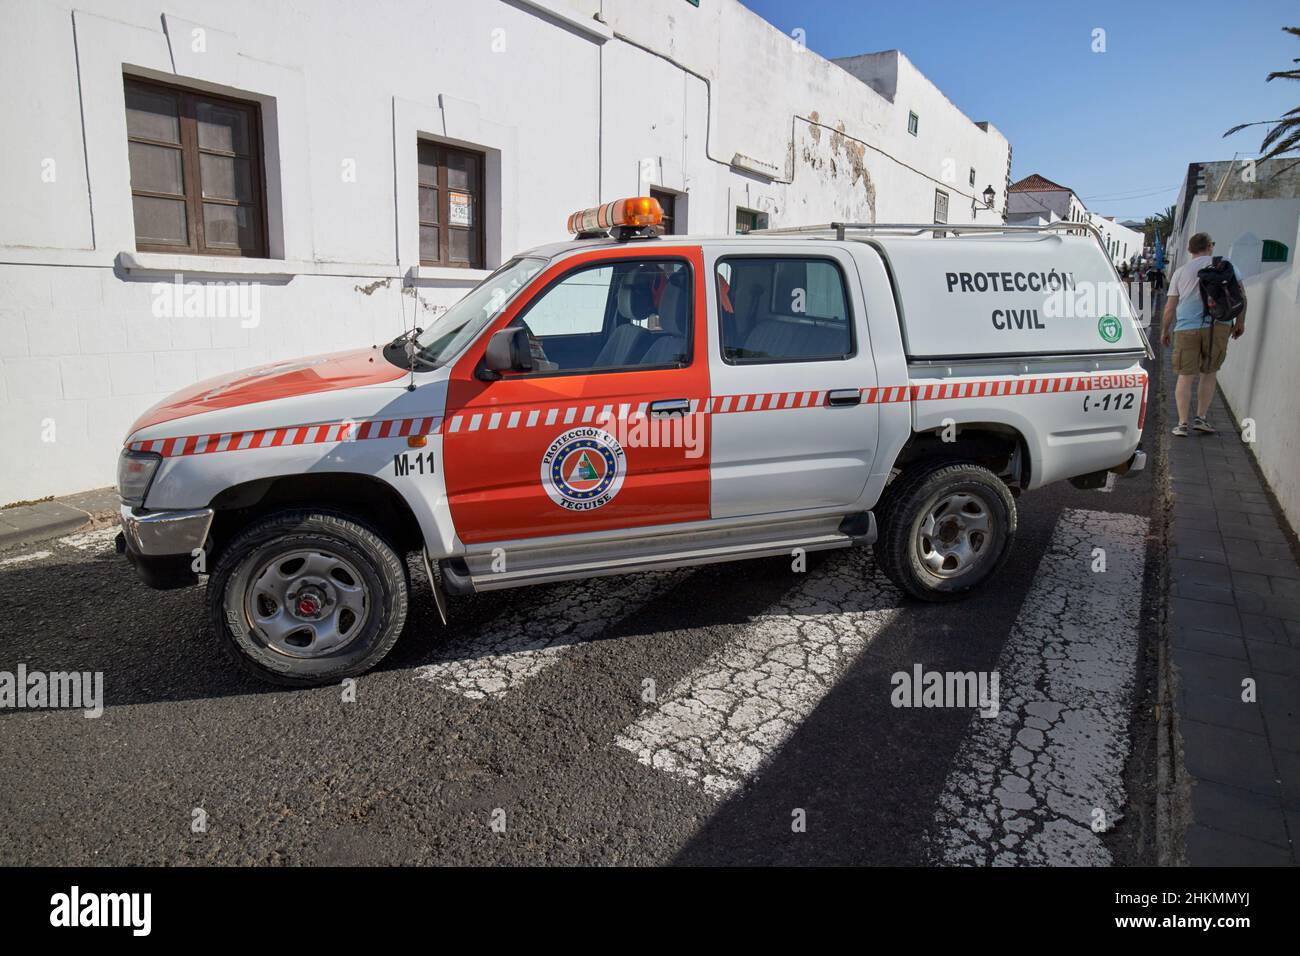 proteccion civil vehicle blocking road during market day Teguise Lanzarote Canary Islands Spain Stock Photo